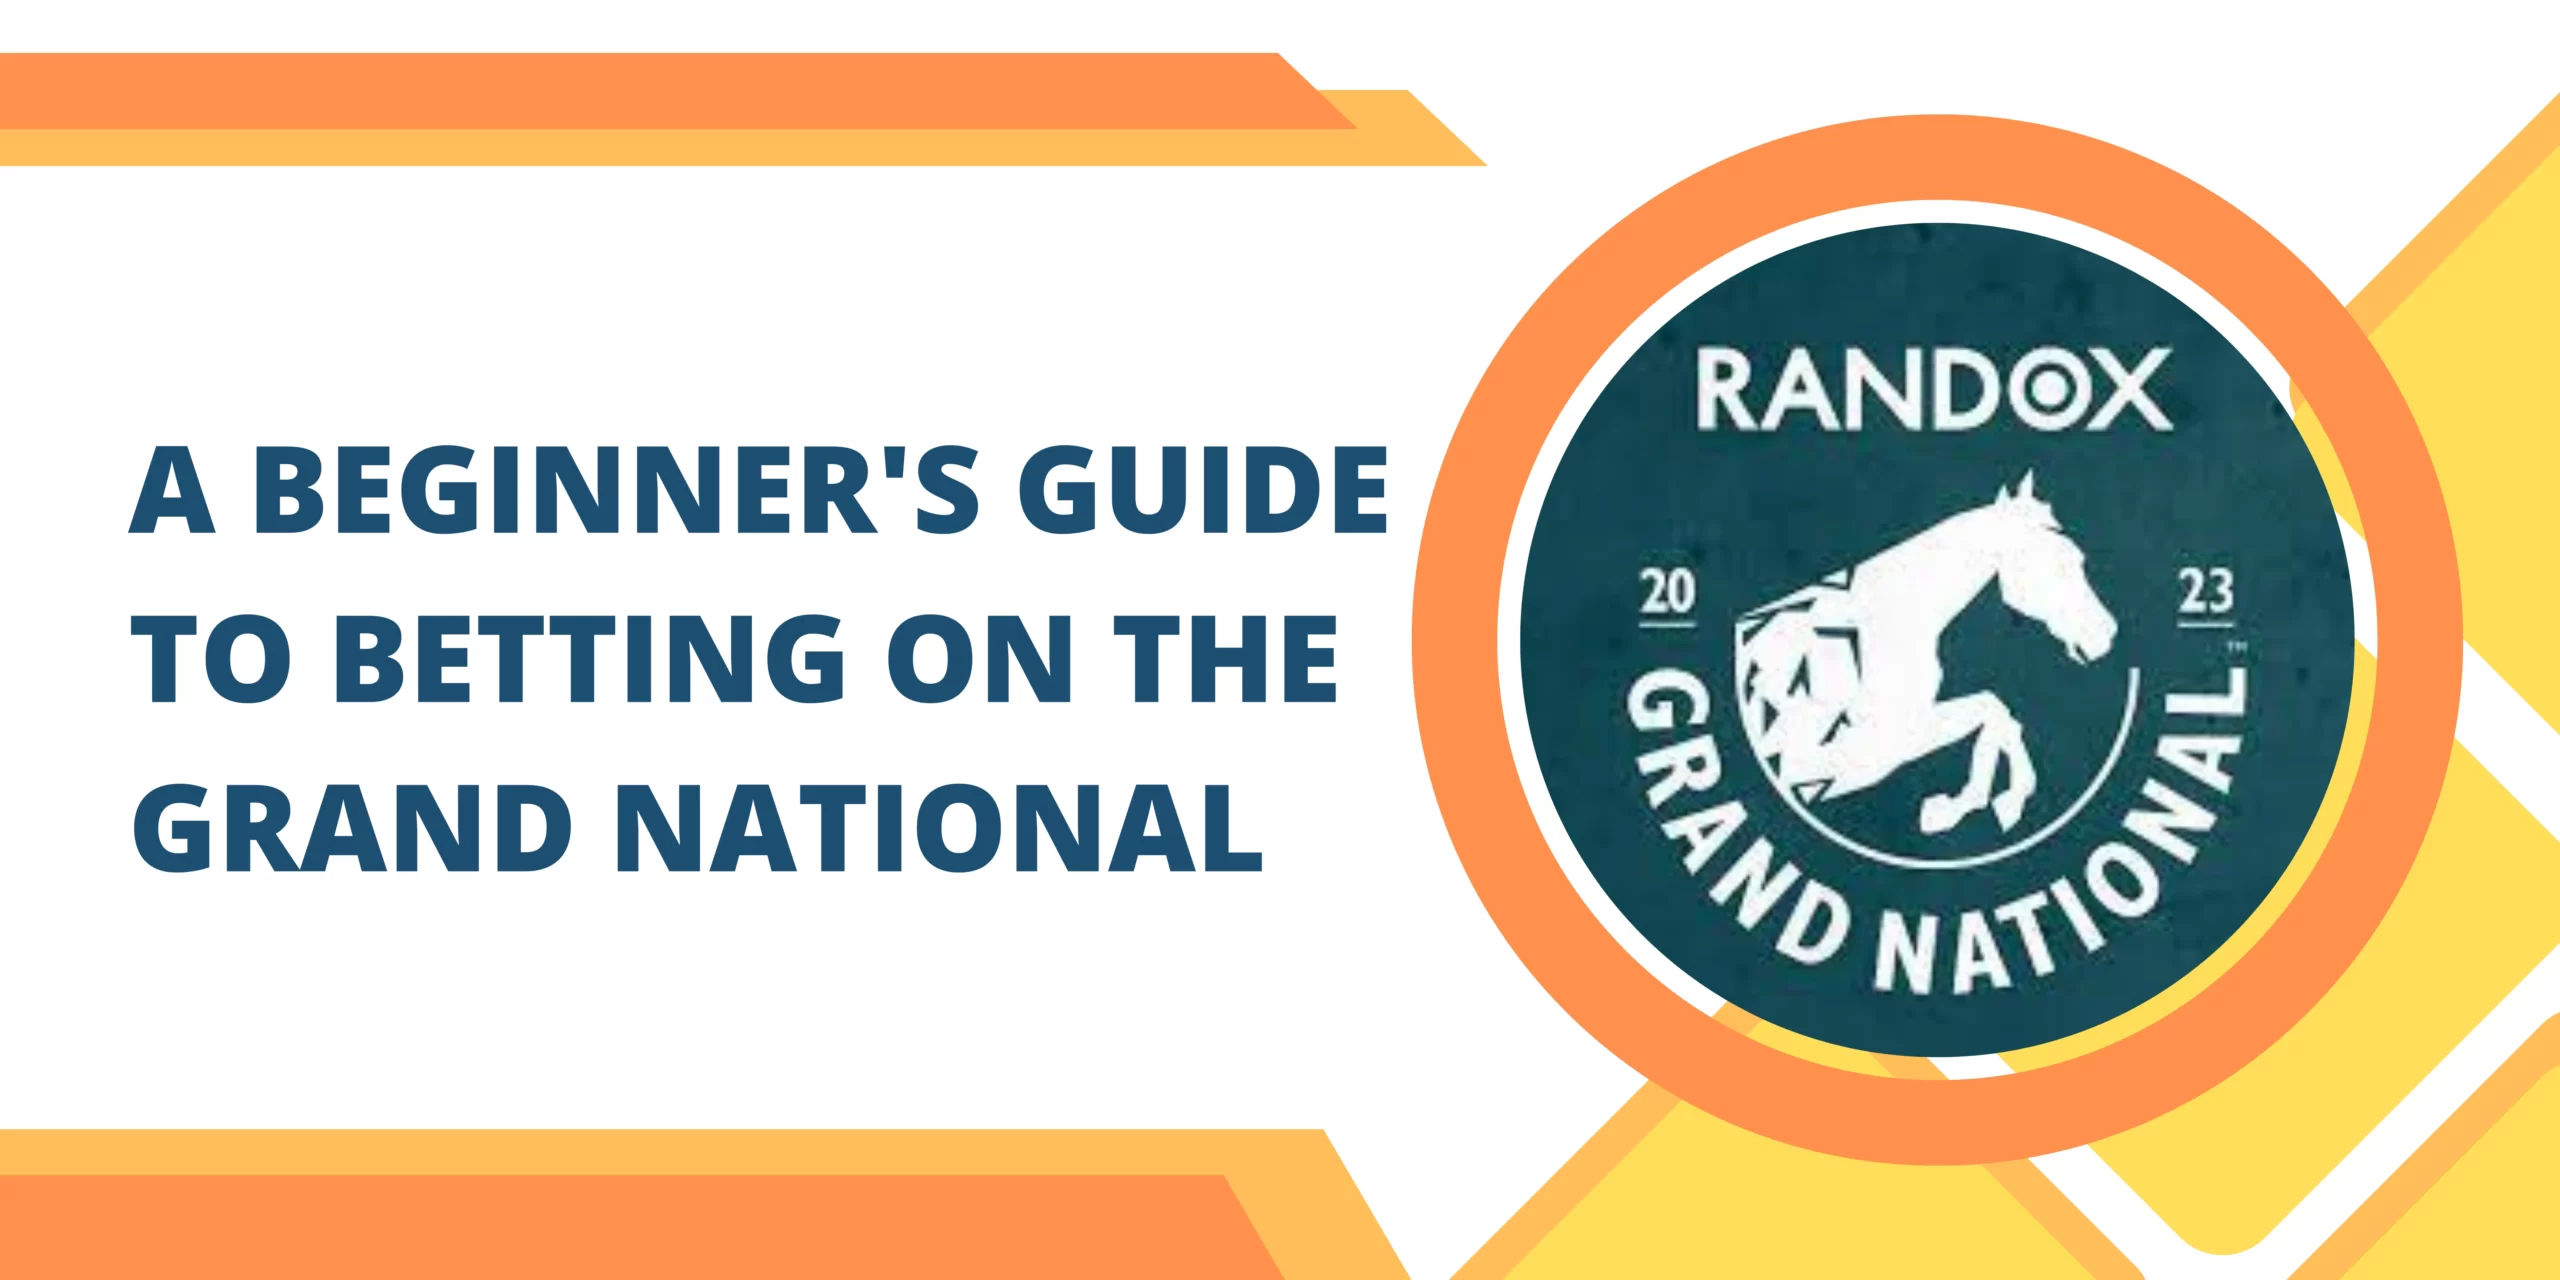 A Beginner's Guide to Betting on the Grand National